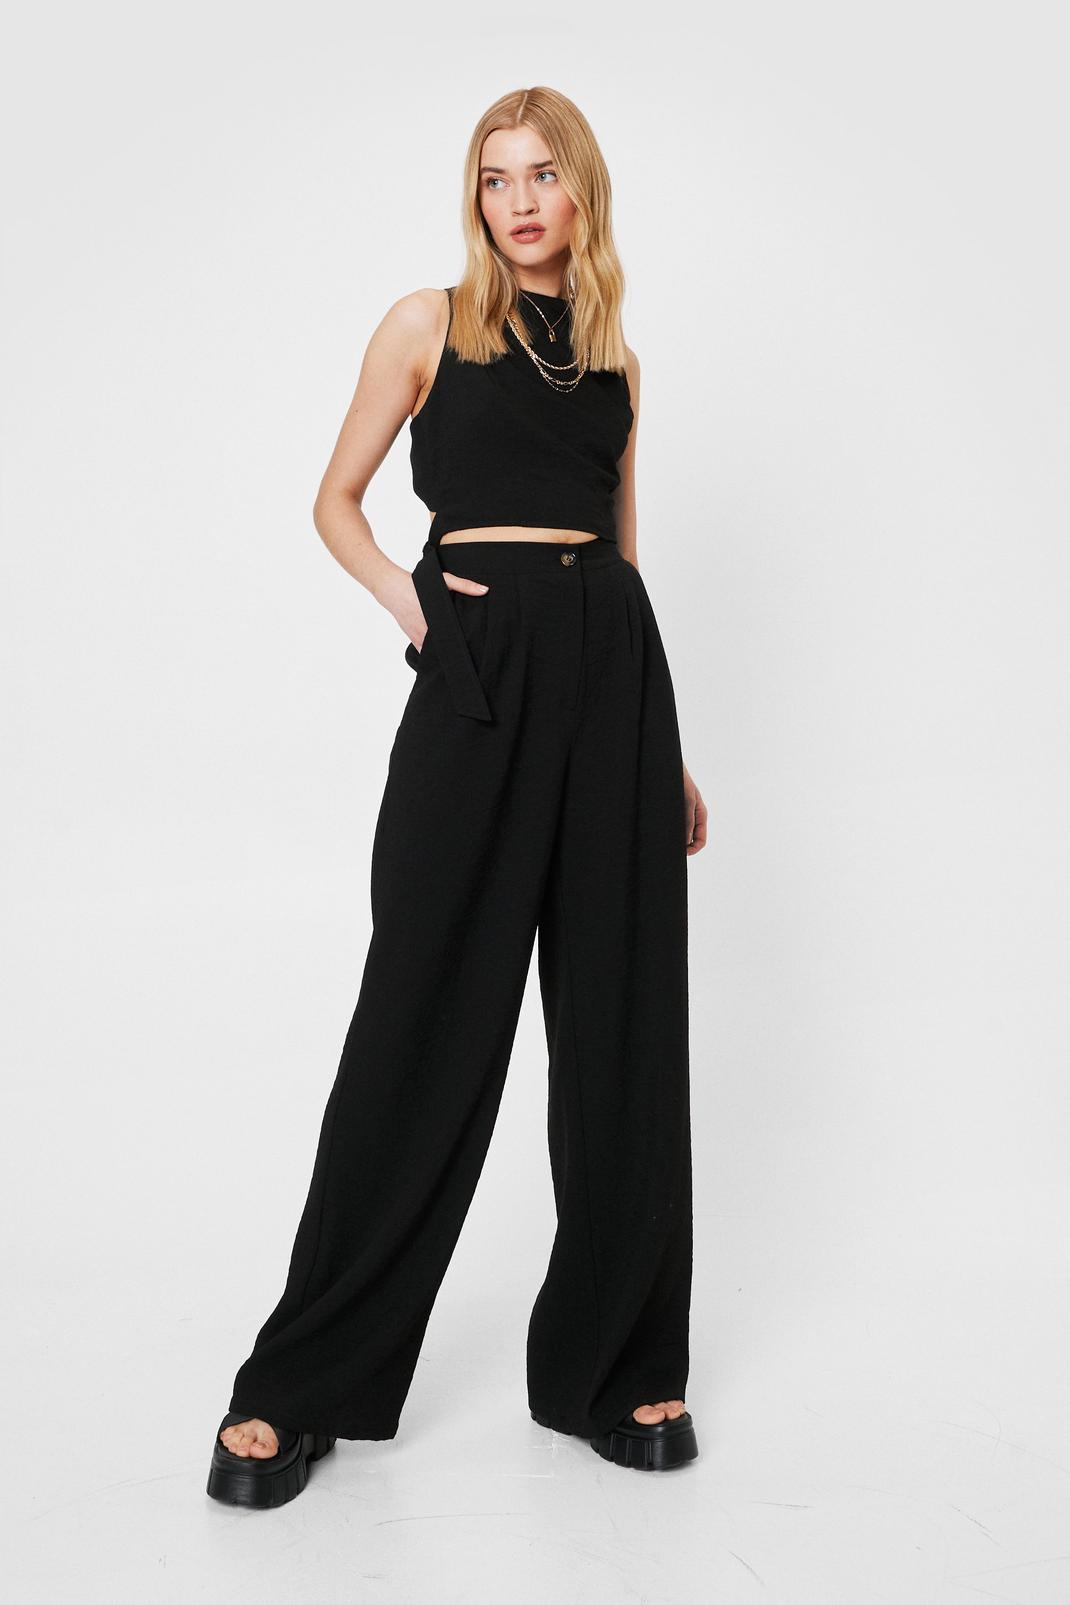 MUGUOY The Effortless Tailored Wide Leg Pants, Casual High Waisted